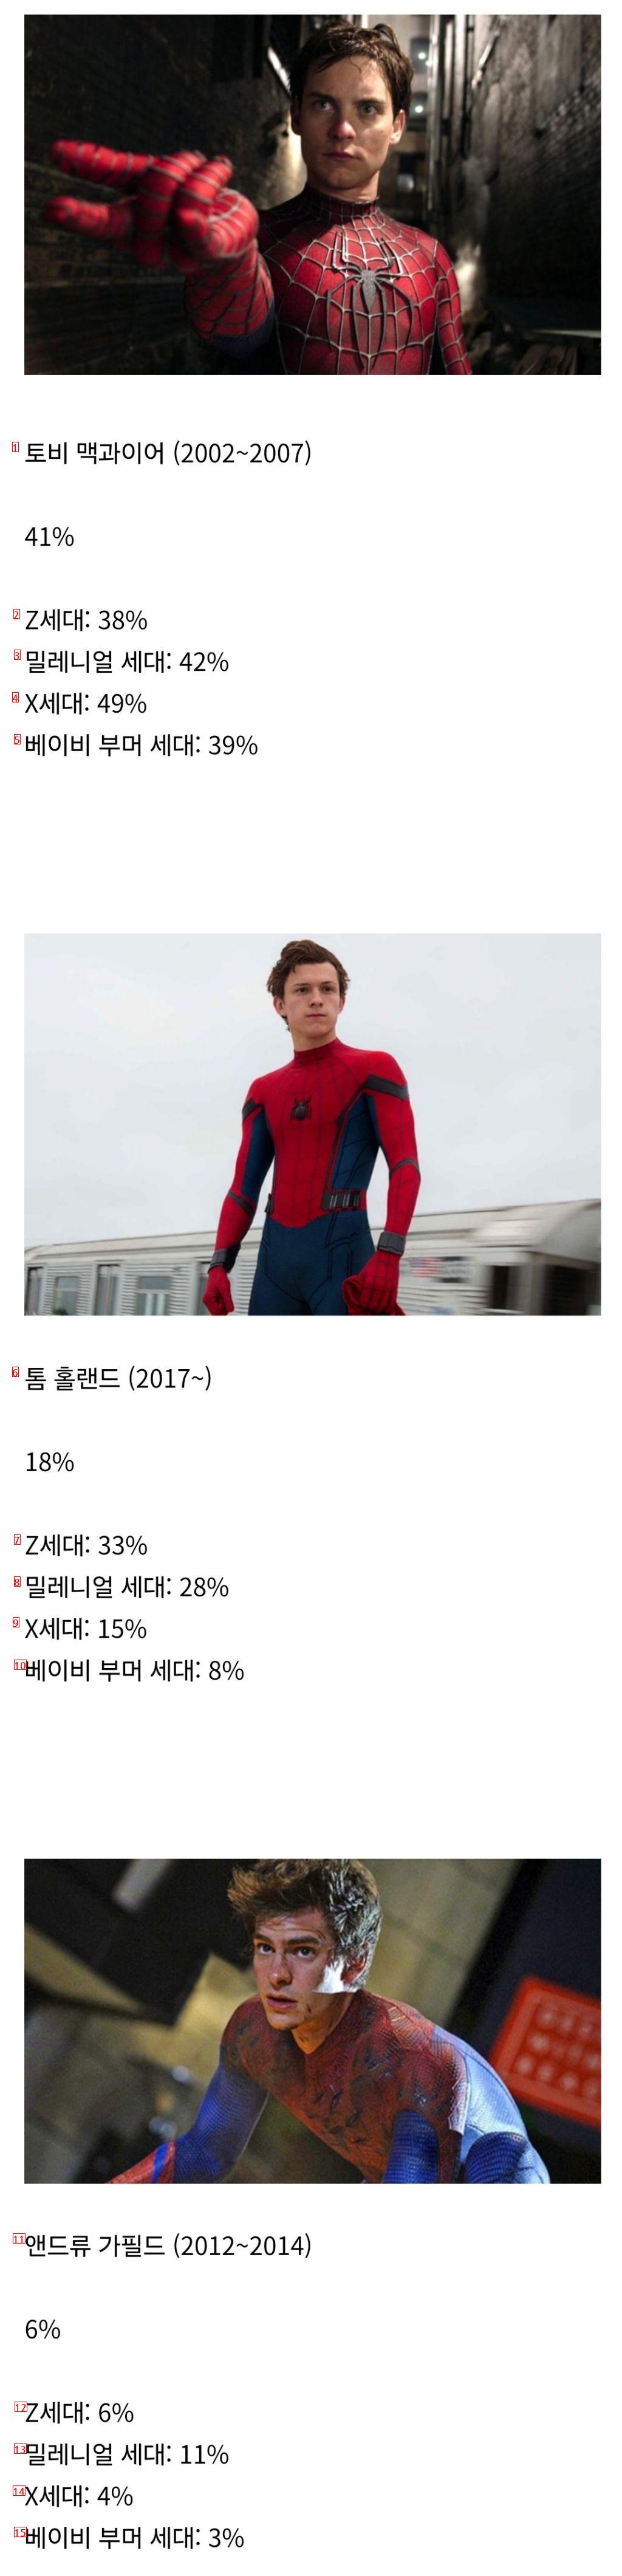 Most Favourite Spider-Man Actor's Survey in the U.S